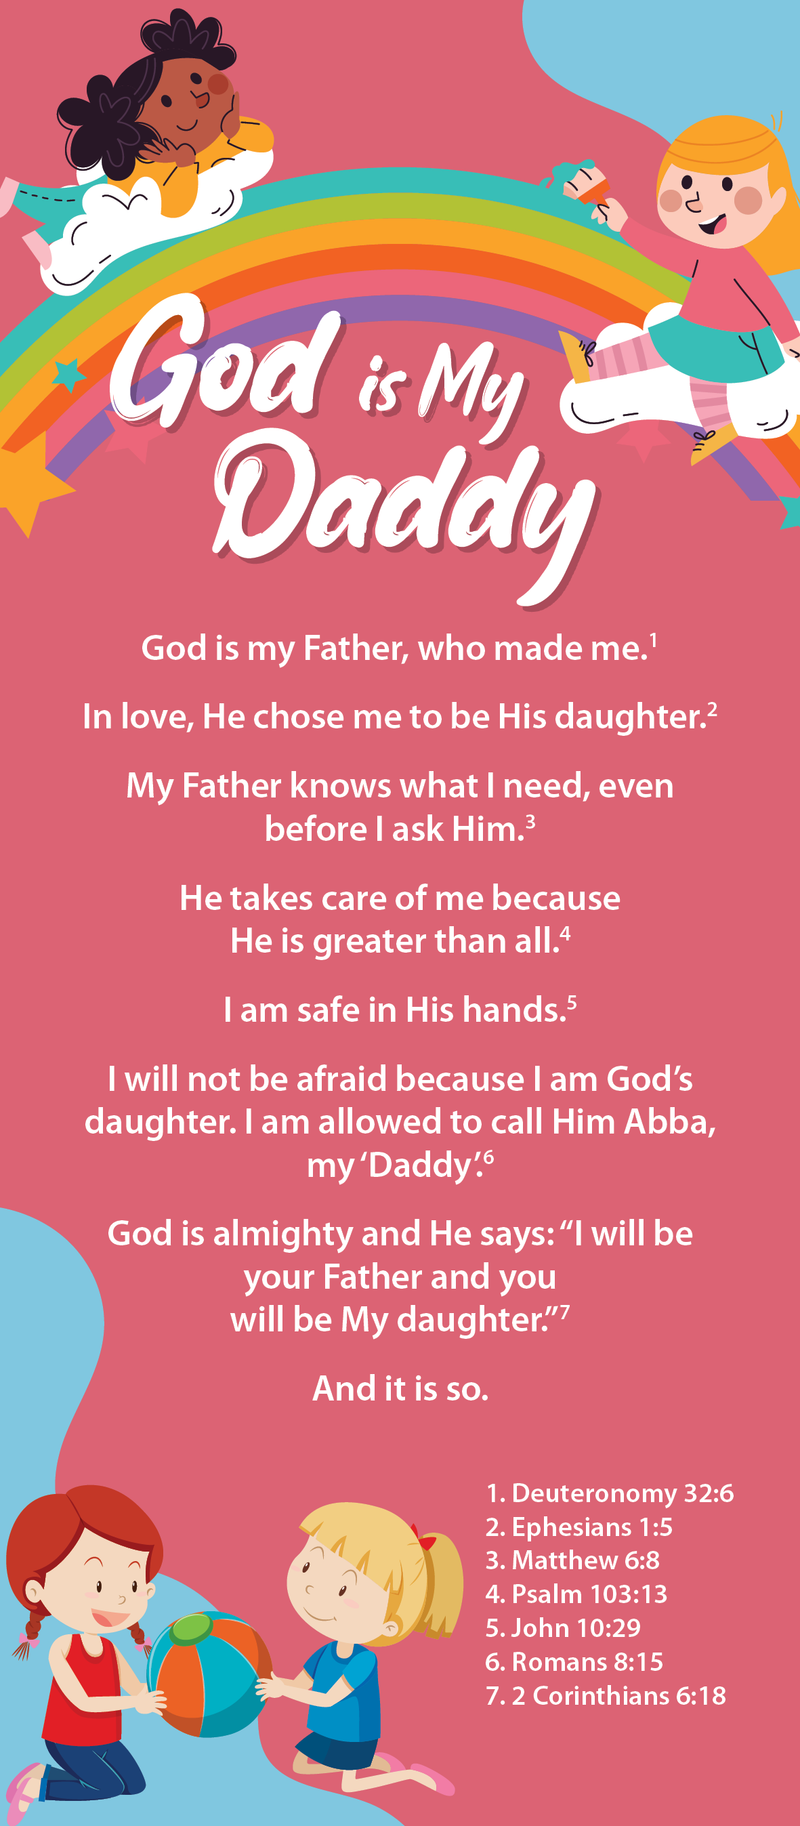 Children's Proclamation - God is my Daddy